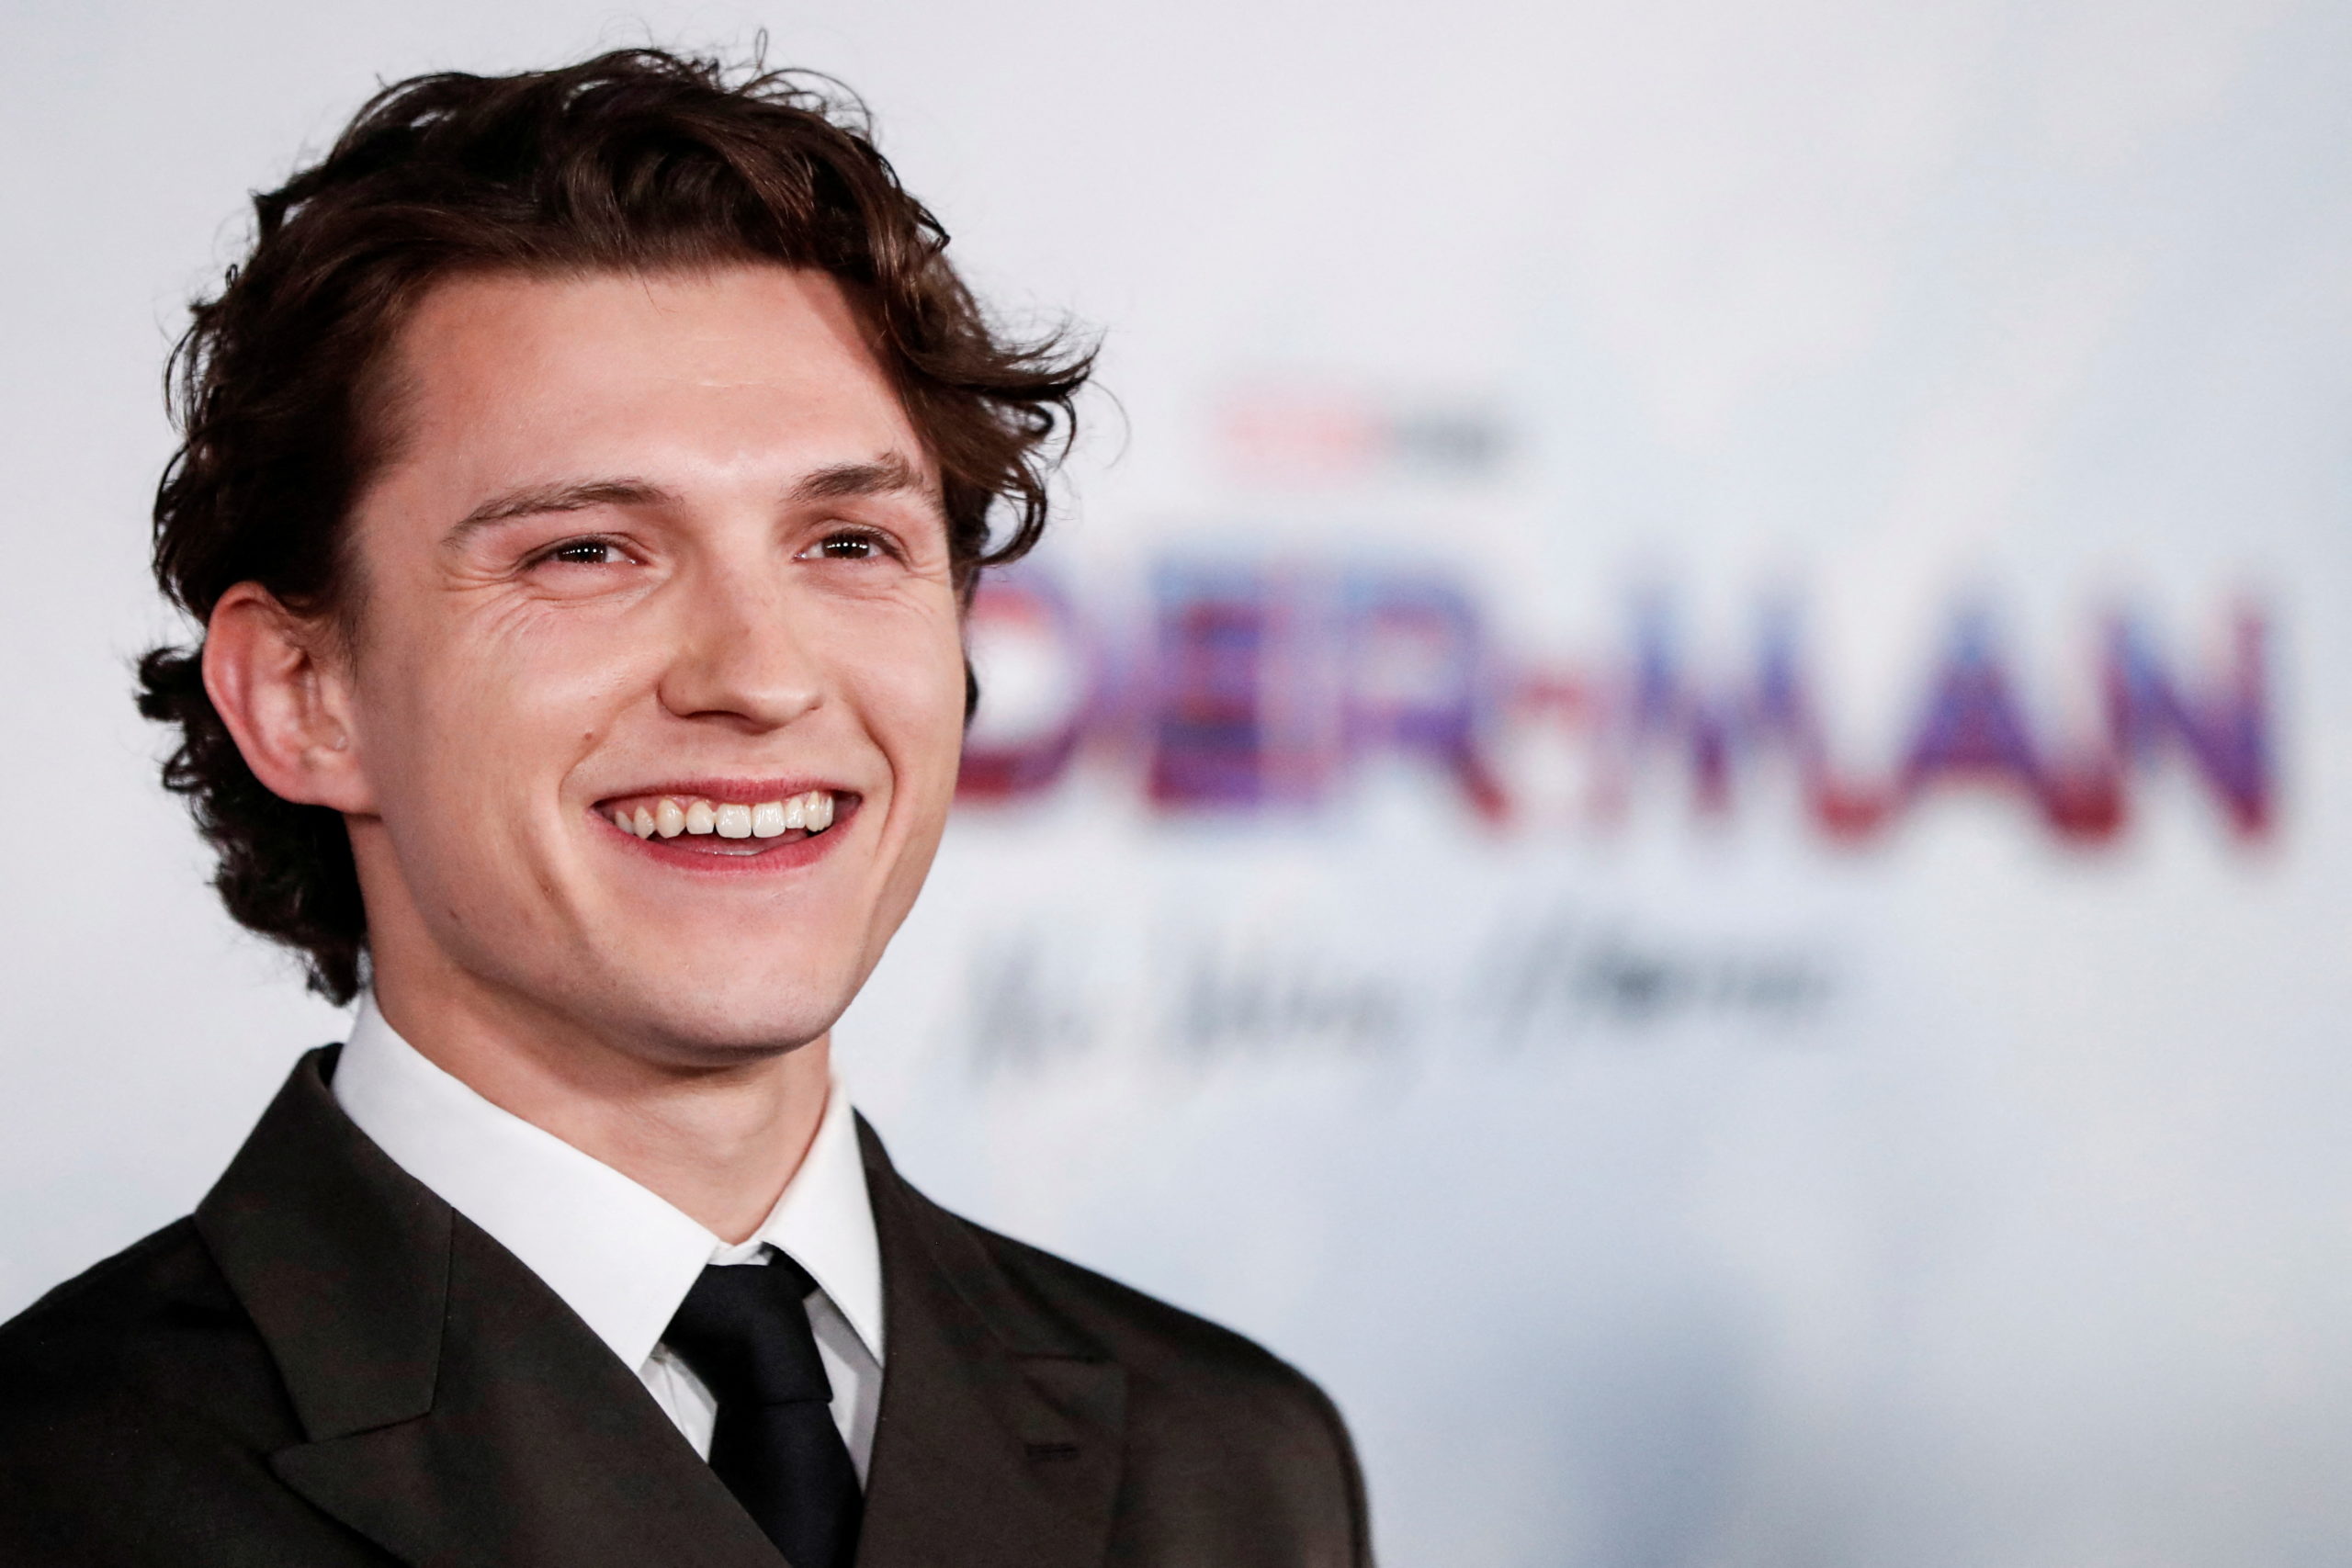 Cast member Tom Holland attends the premiere for the film Spider-Man: No Way Home in Los Angeles, California, December 13, 2021. REUTERS/Mario Anzuoni/File Photo